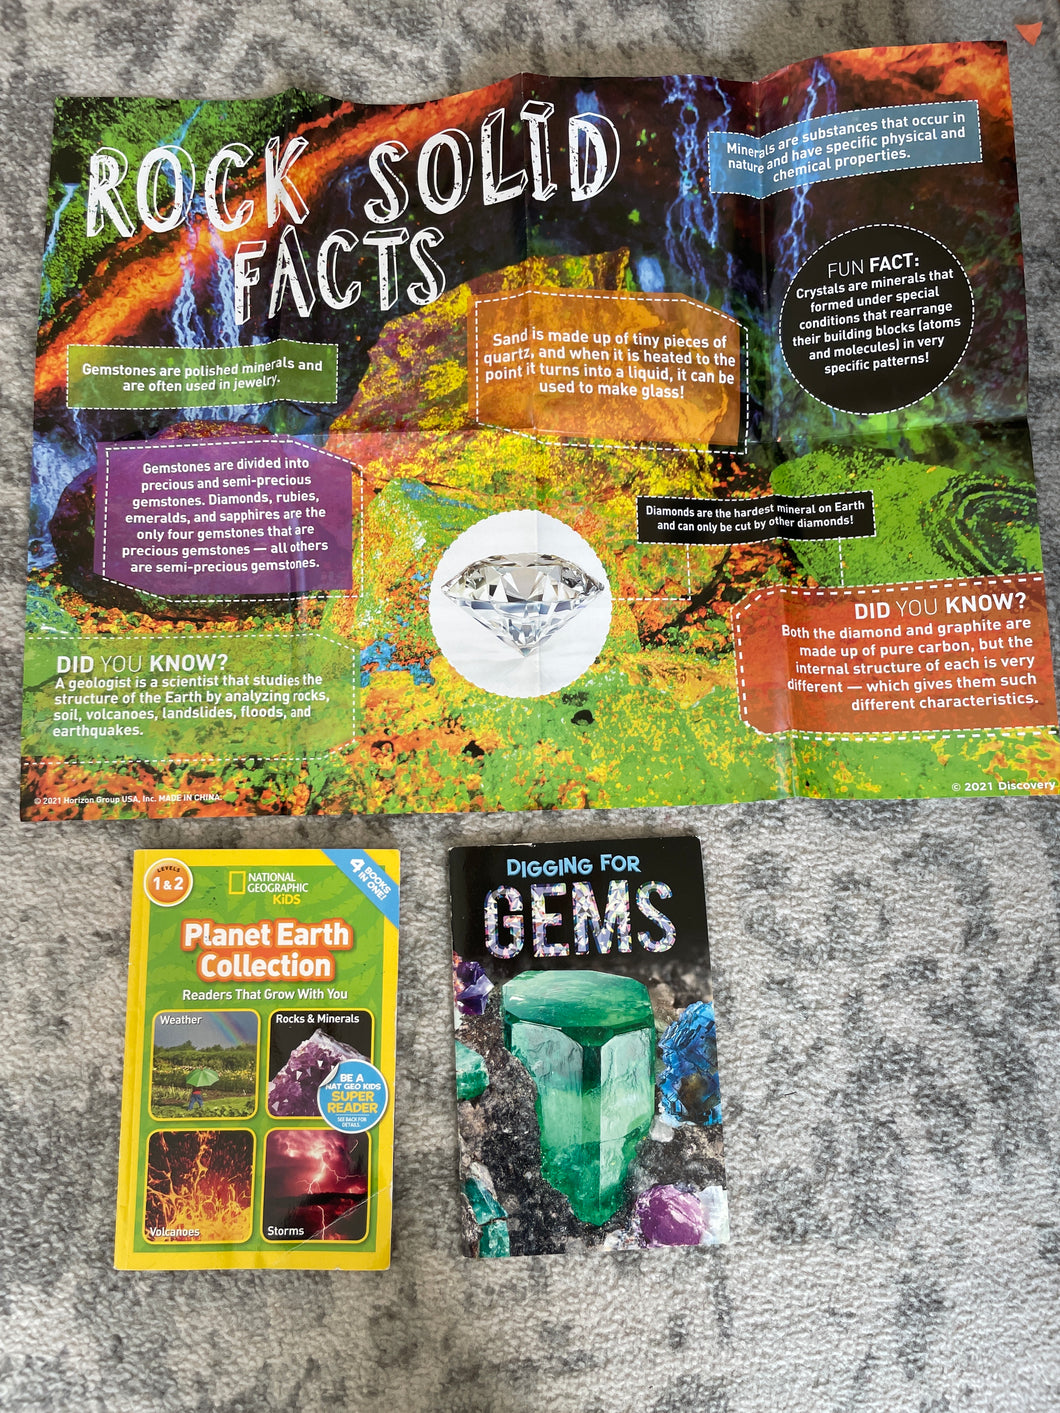 early reader nonfiction- Gems, poster and Planet Earth 4books in 1